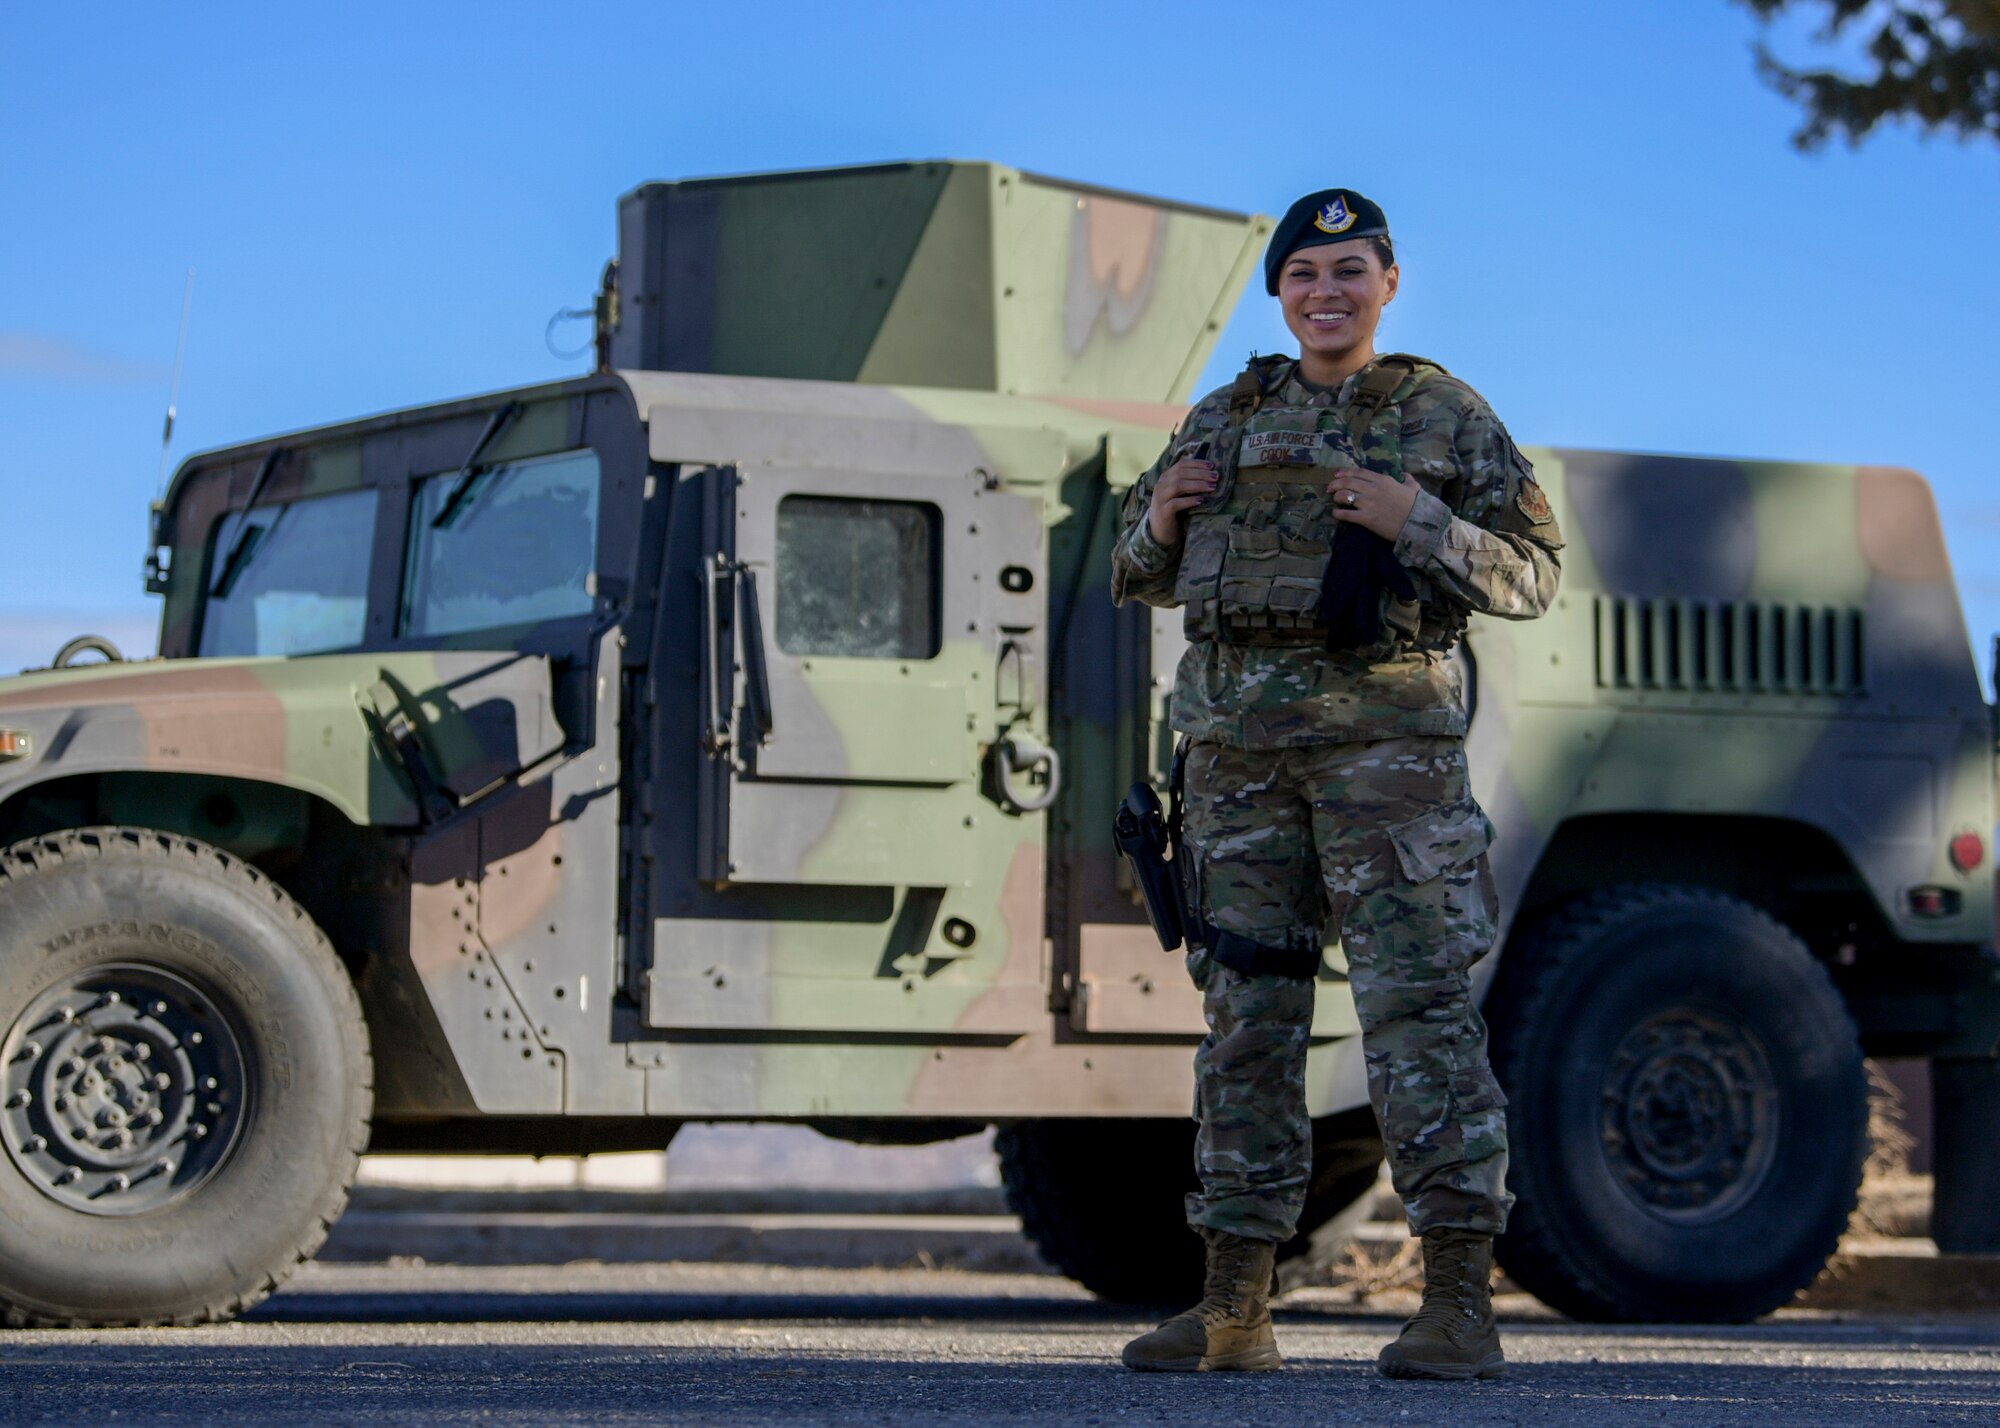 Airmen from the 377th Security Forces Group were among the first Air Force defenders to receive the new issue of female body armor starting January 2021.